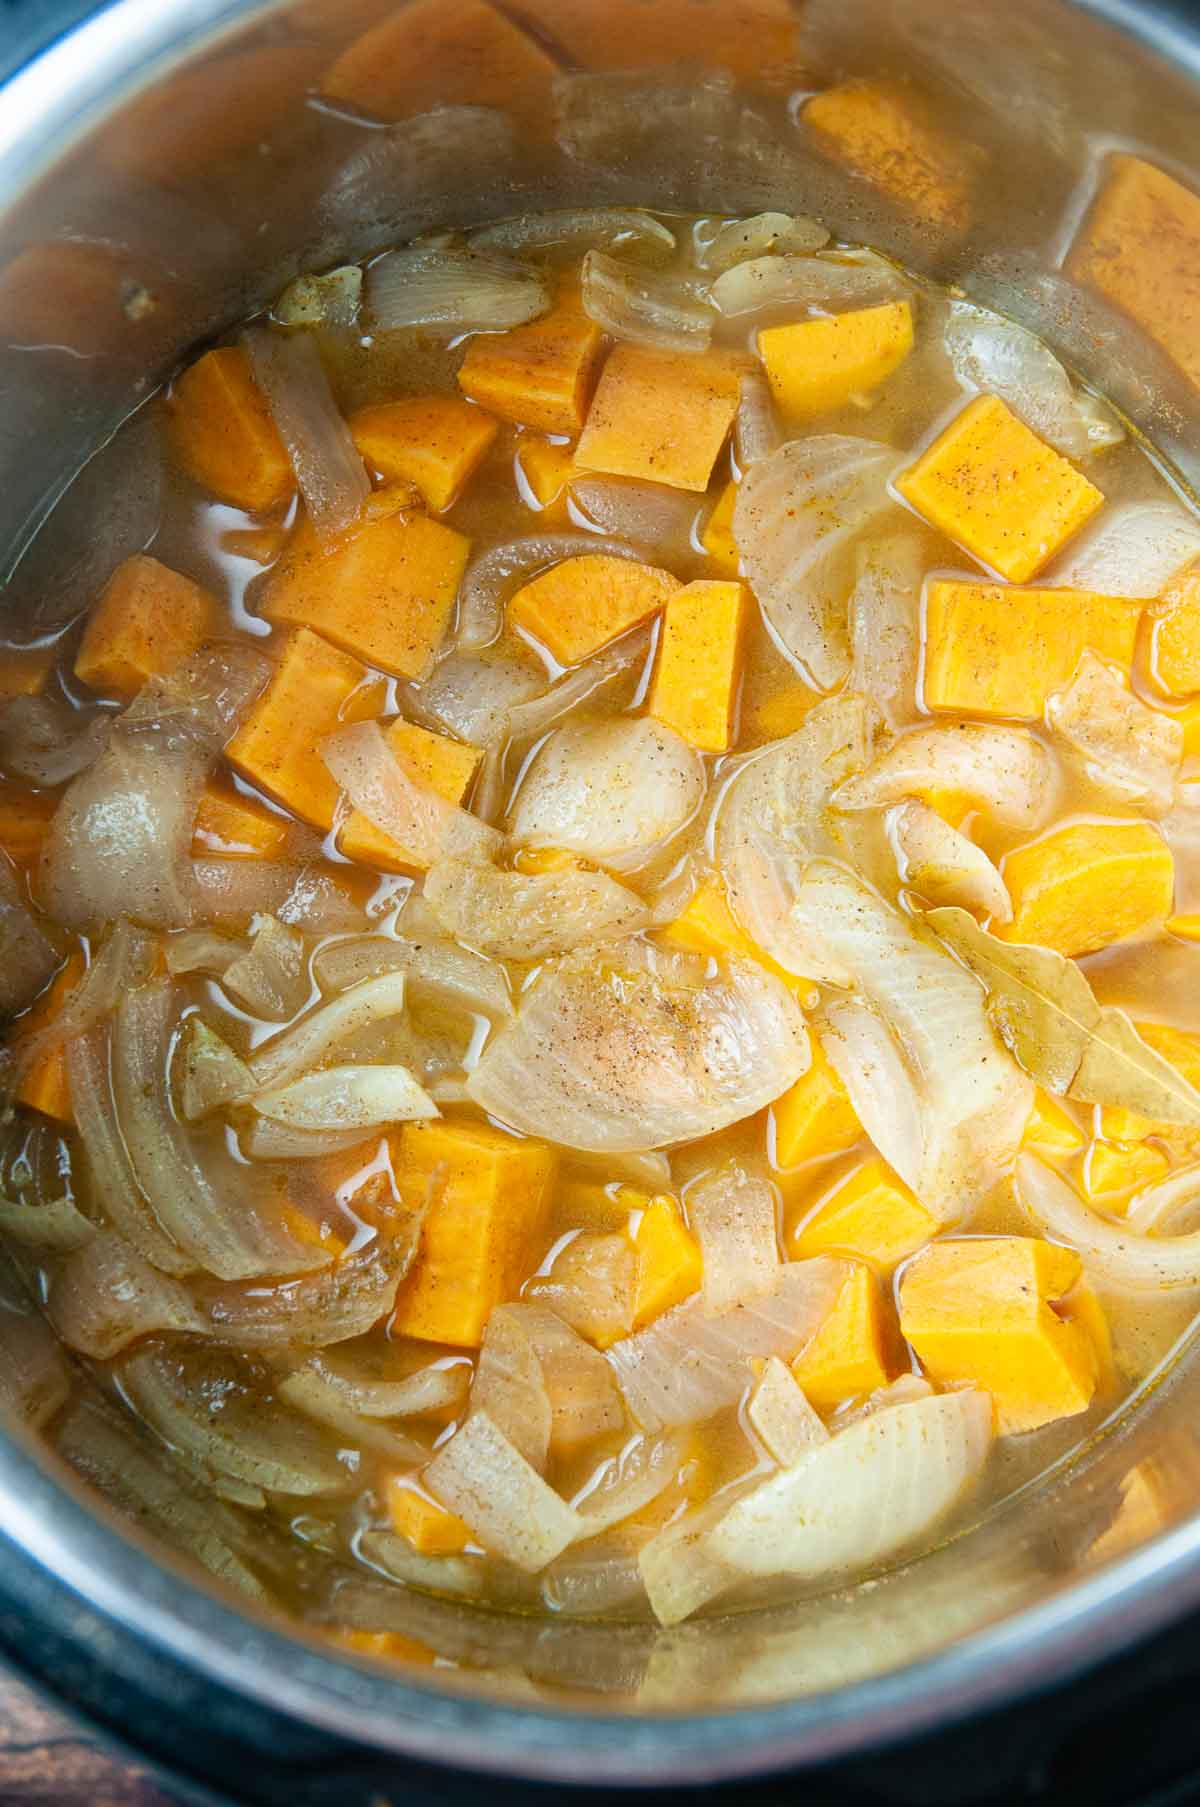 After pressure cooking the onions and sweet potatoes in spices and broth they should be soft.